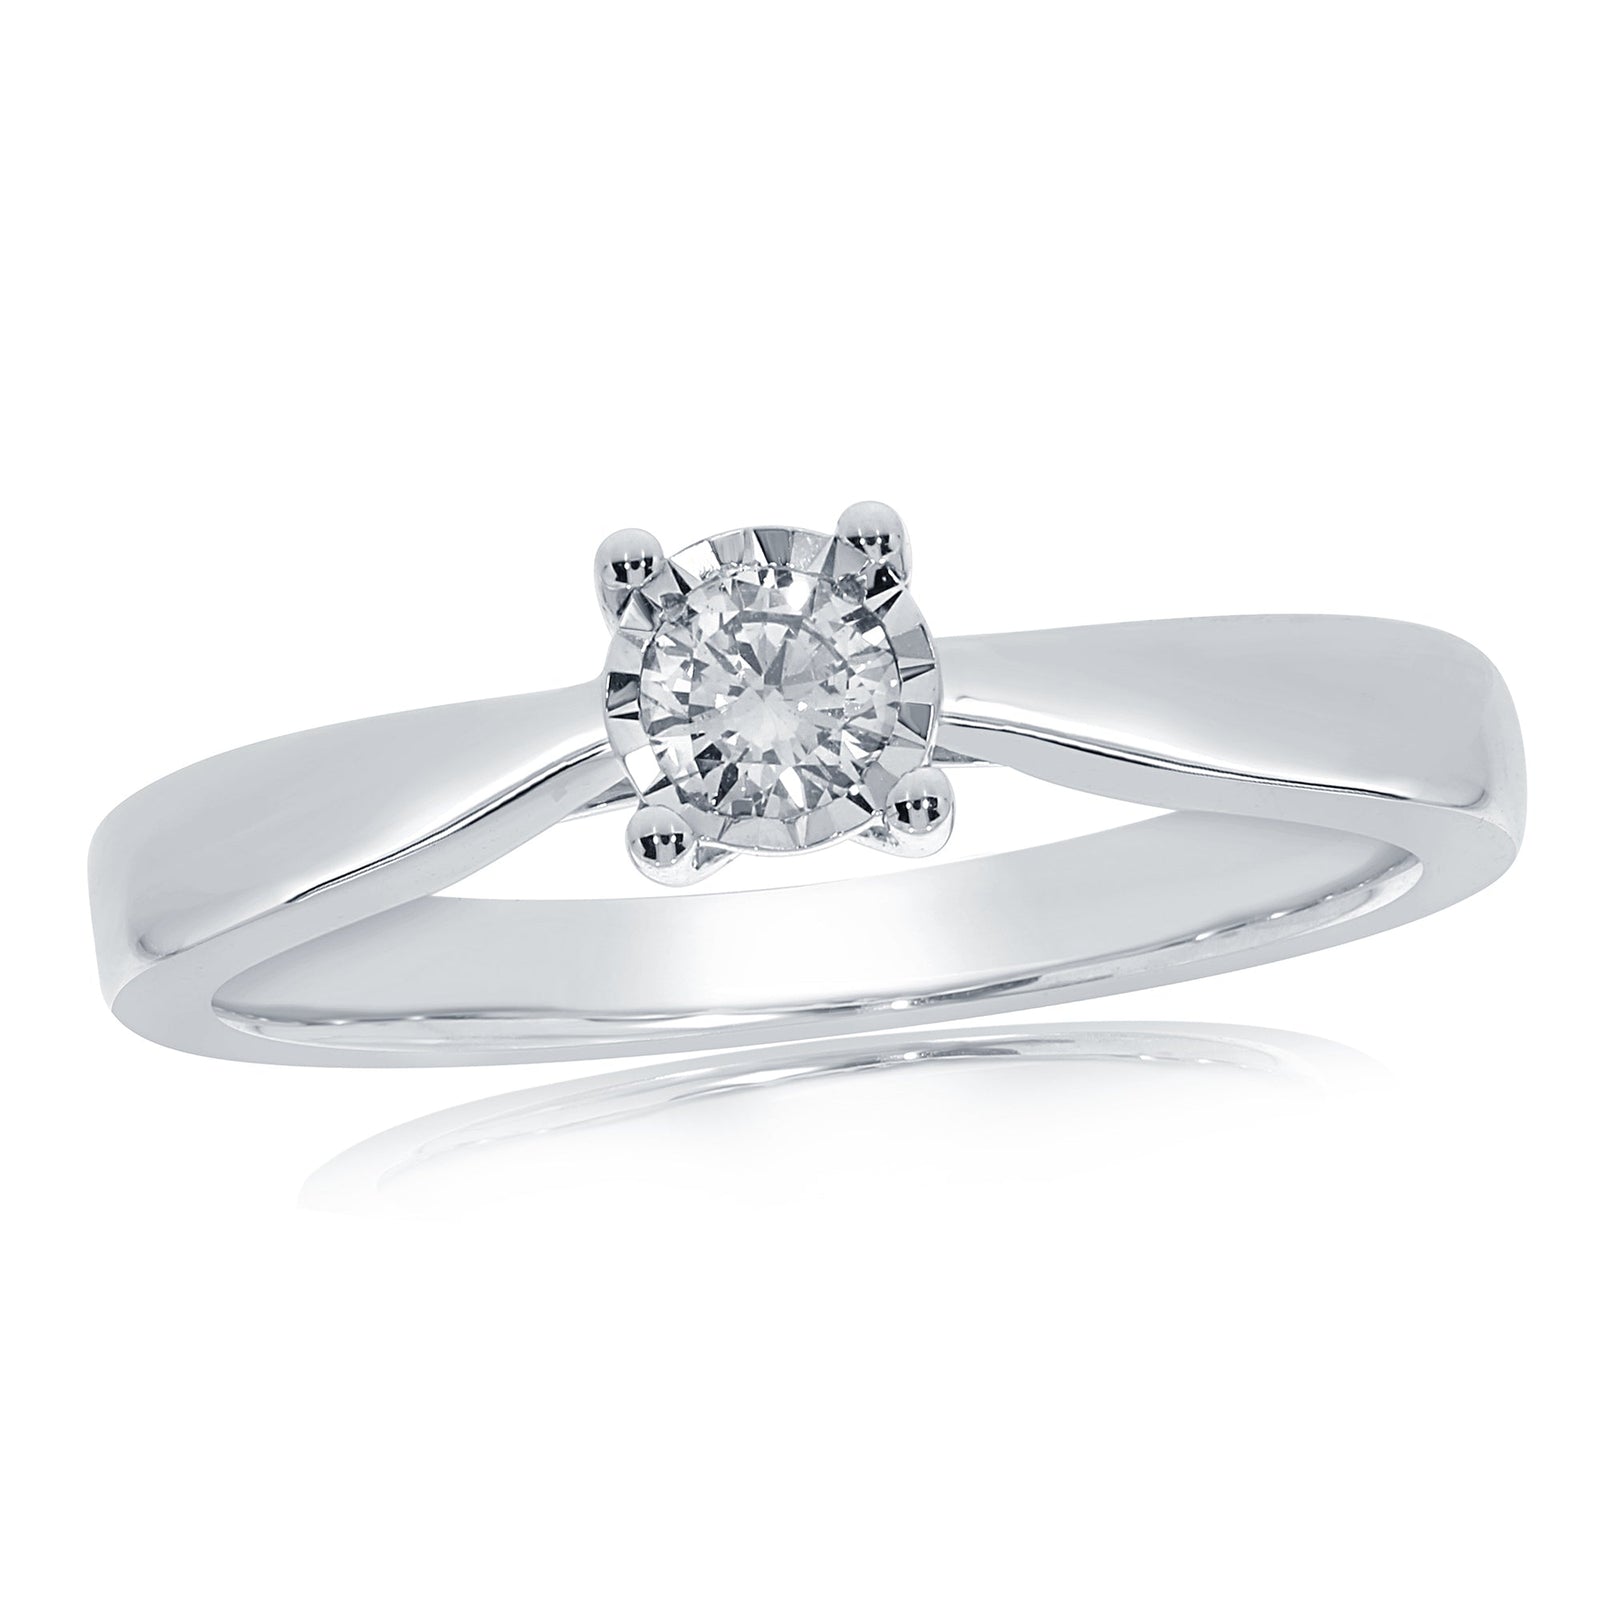 9ct white gold single stone miracle plate diamond ring 0.17ct